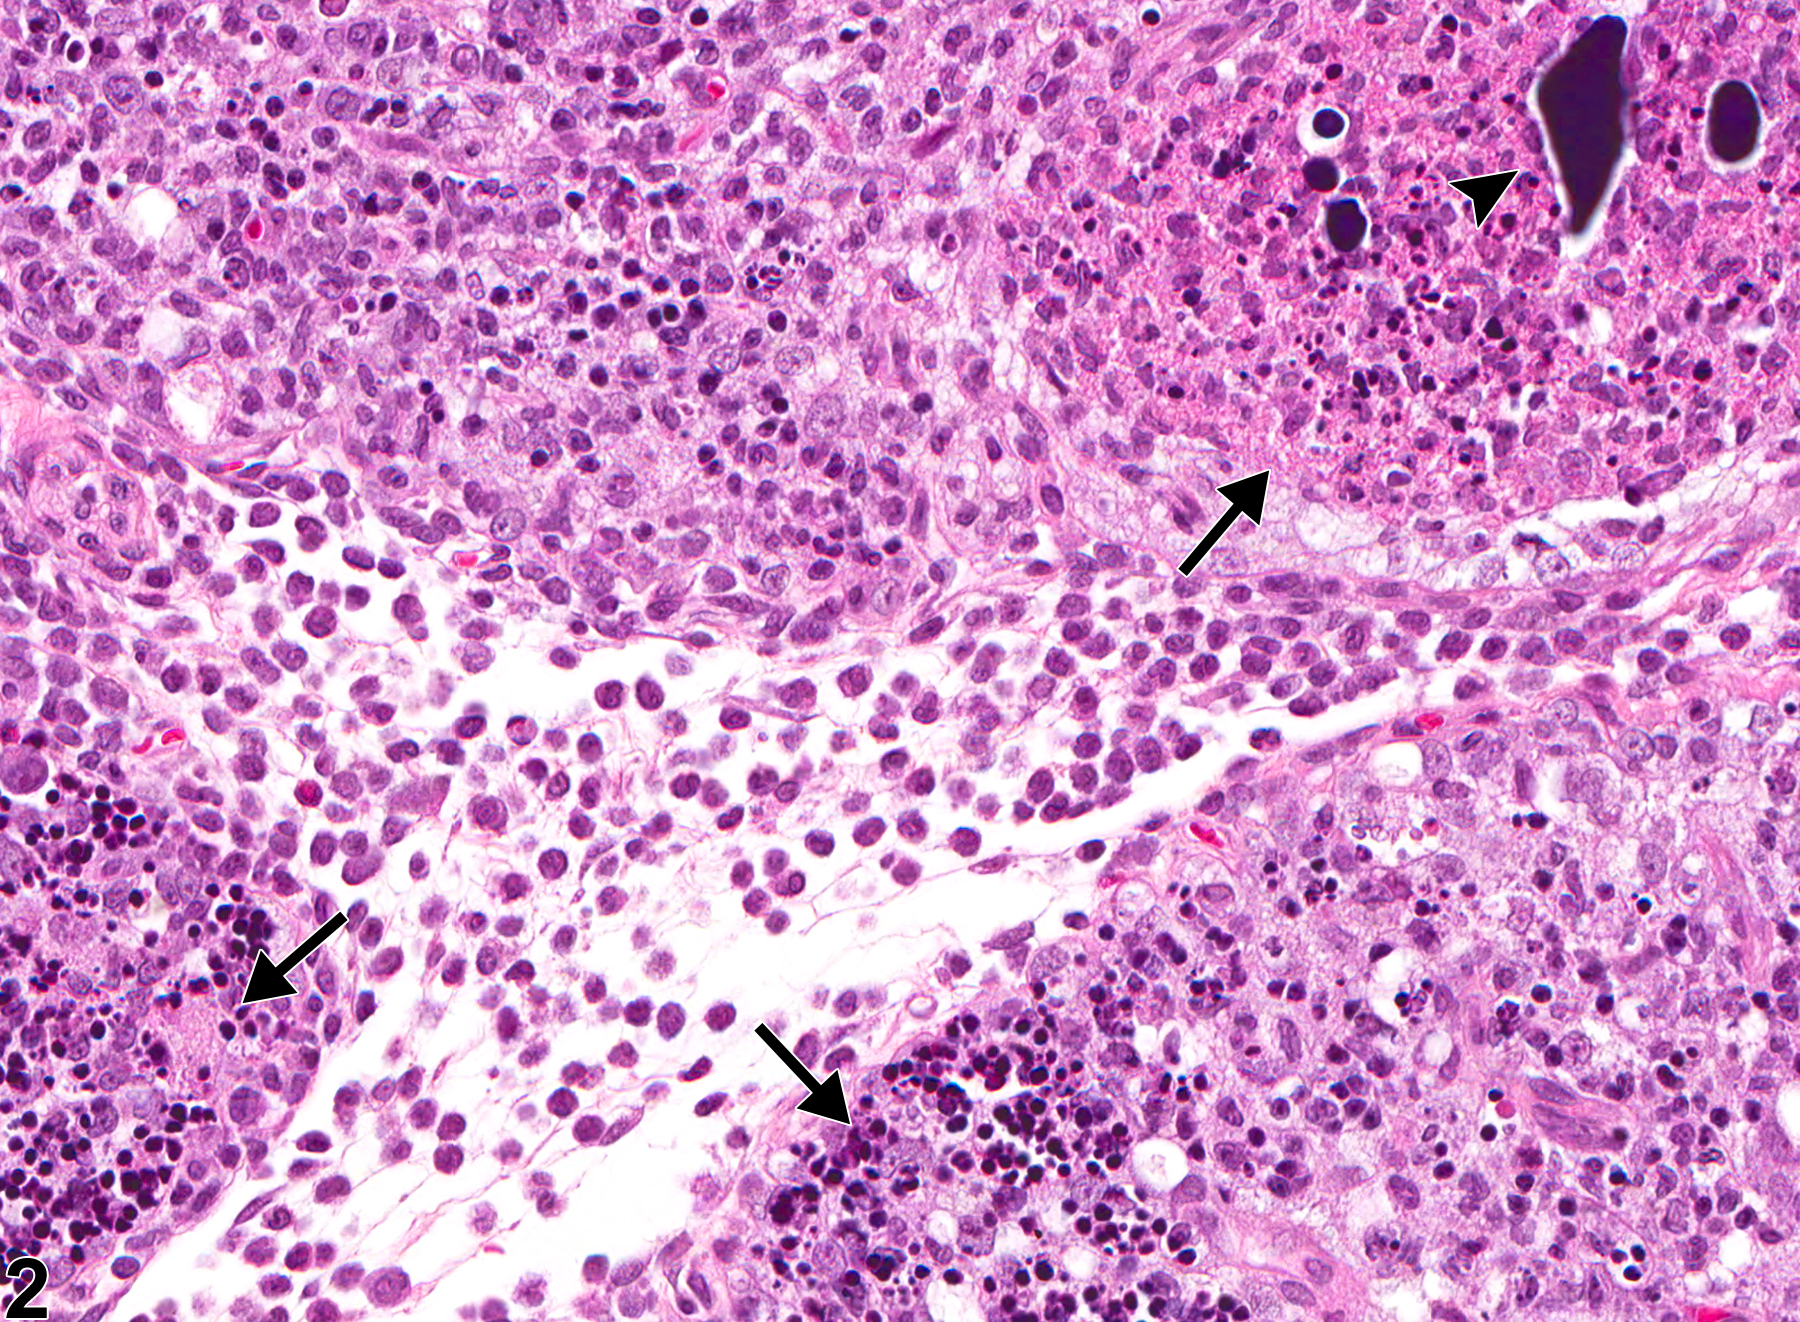 Image of necrosis, lymphocyte in the thymus from a male Harlan Sprague-Dawley rat in a chronic study